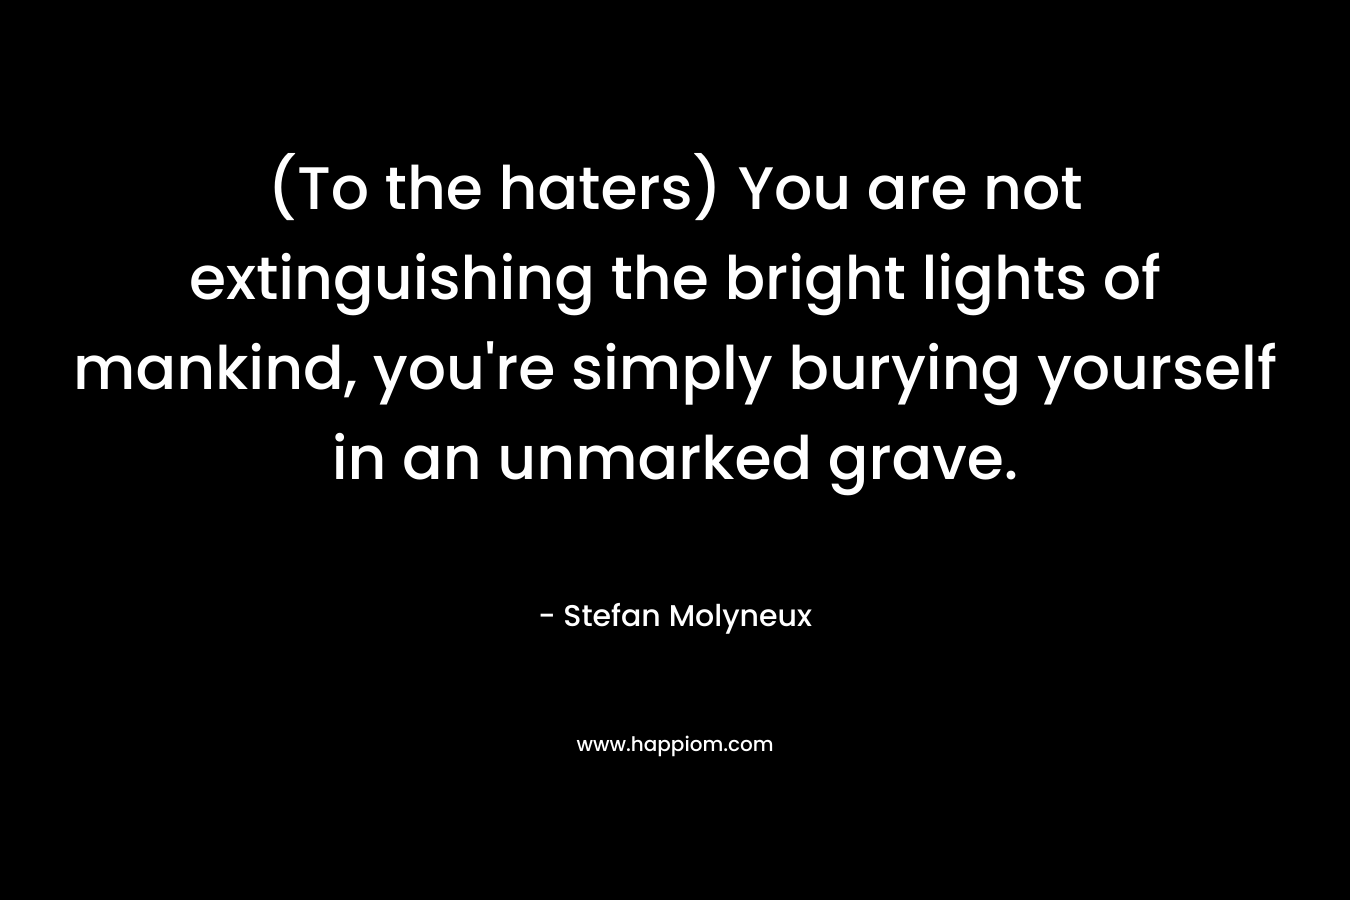 (To the haters) You are not extinguishing the bright lights of mankind, you're simply burying yourself in an unmarked grave.